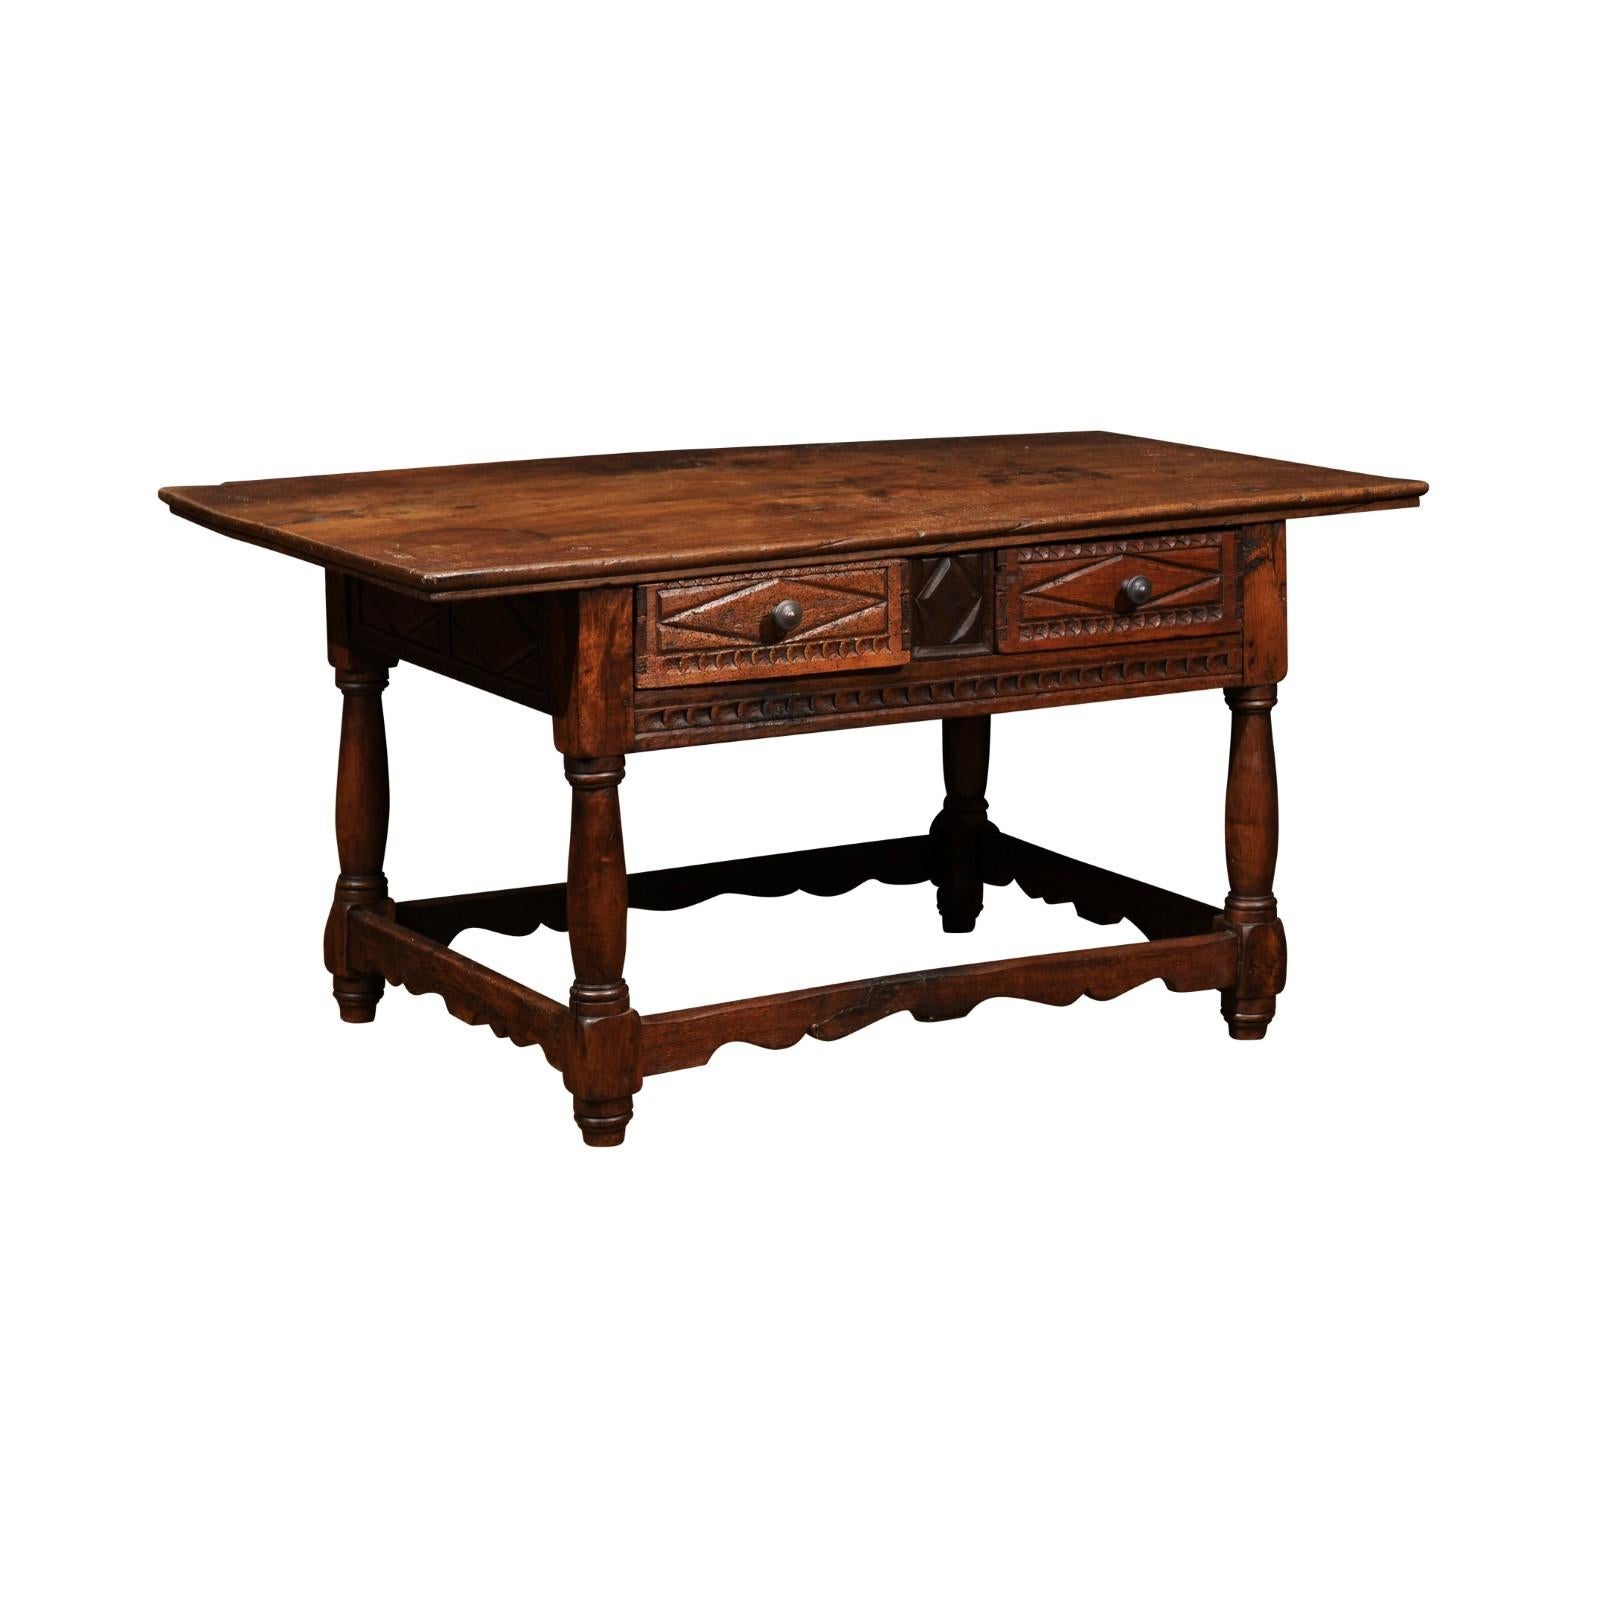 18th century and Later Spanish Walnut Center Table with 2 Drawers & Box Stretcher.